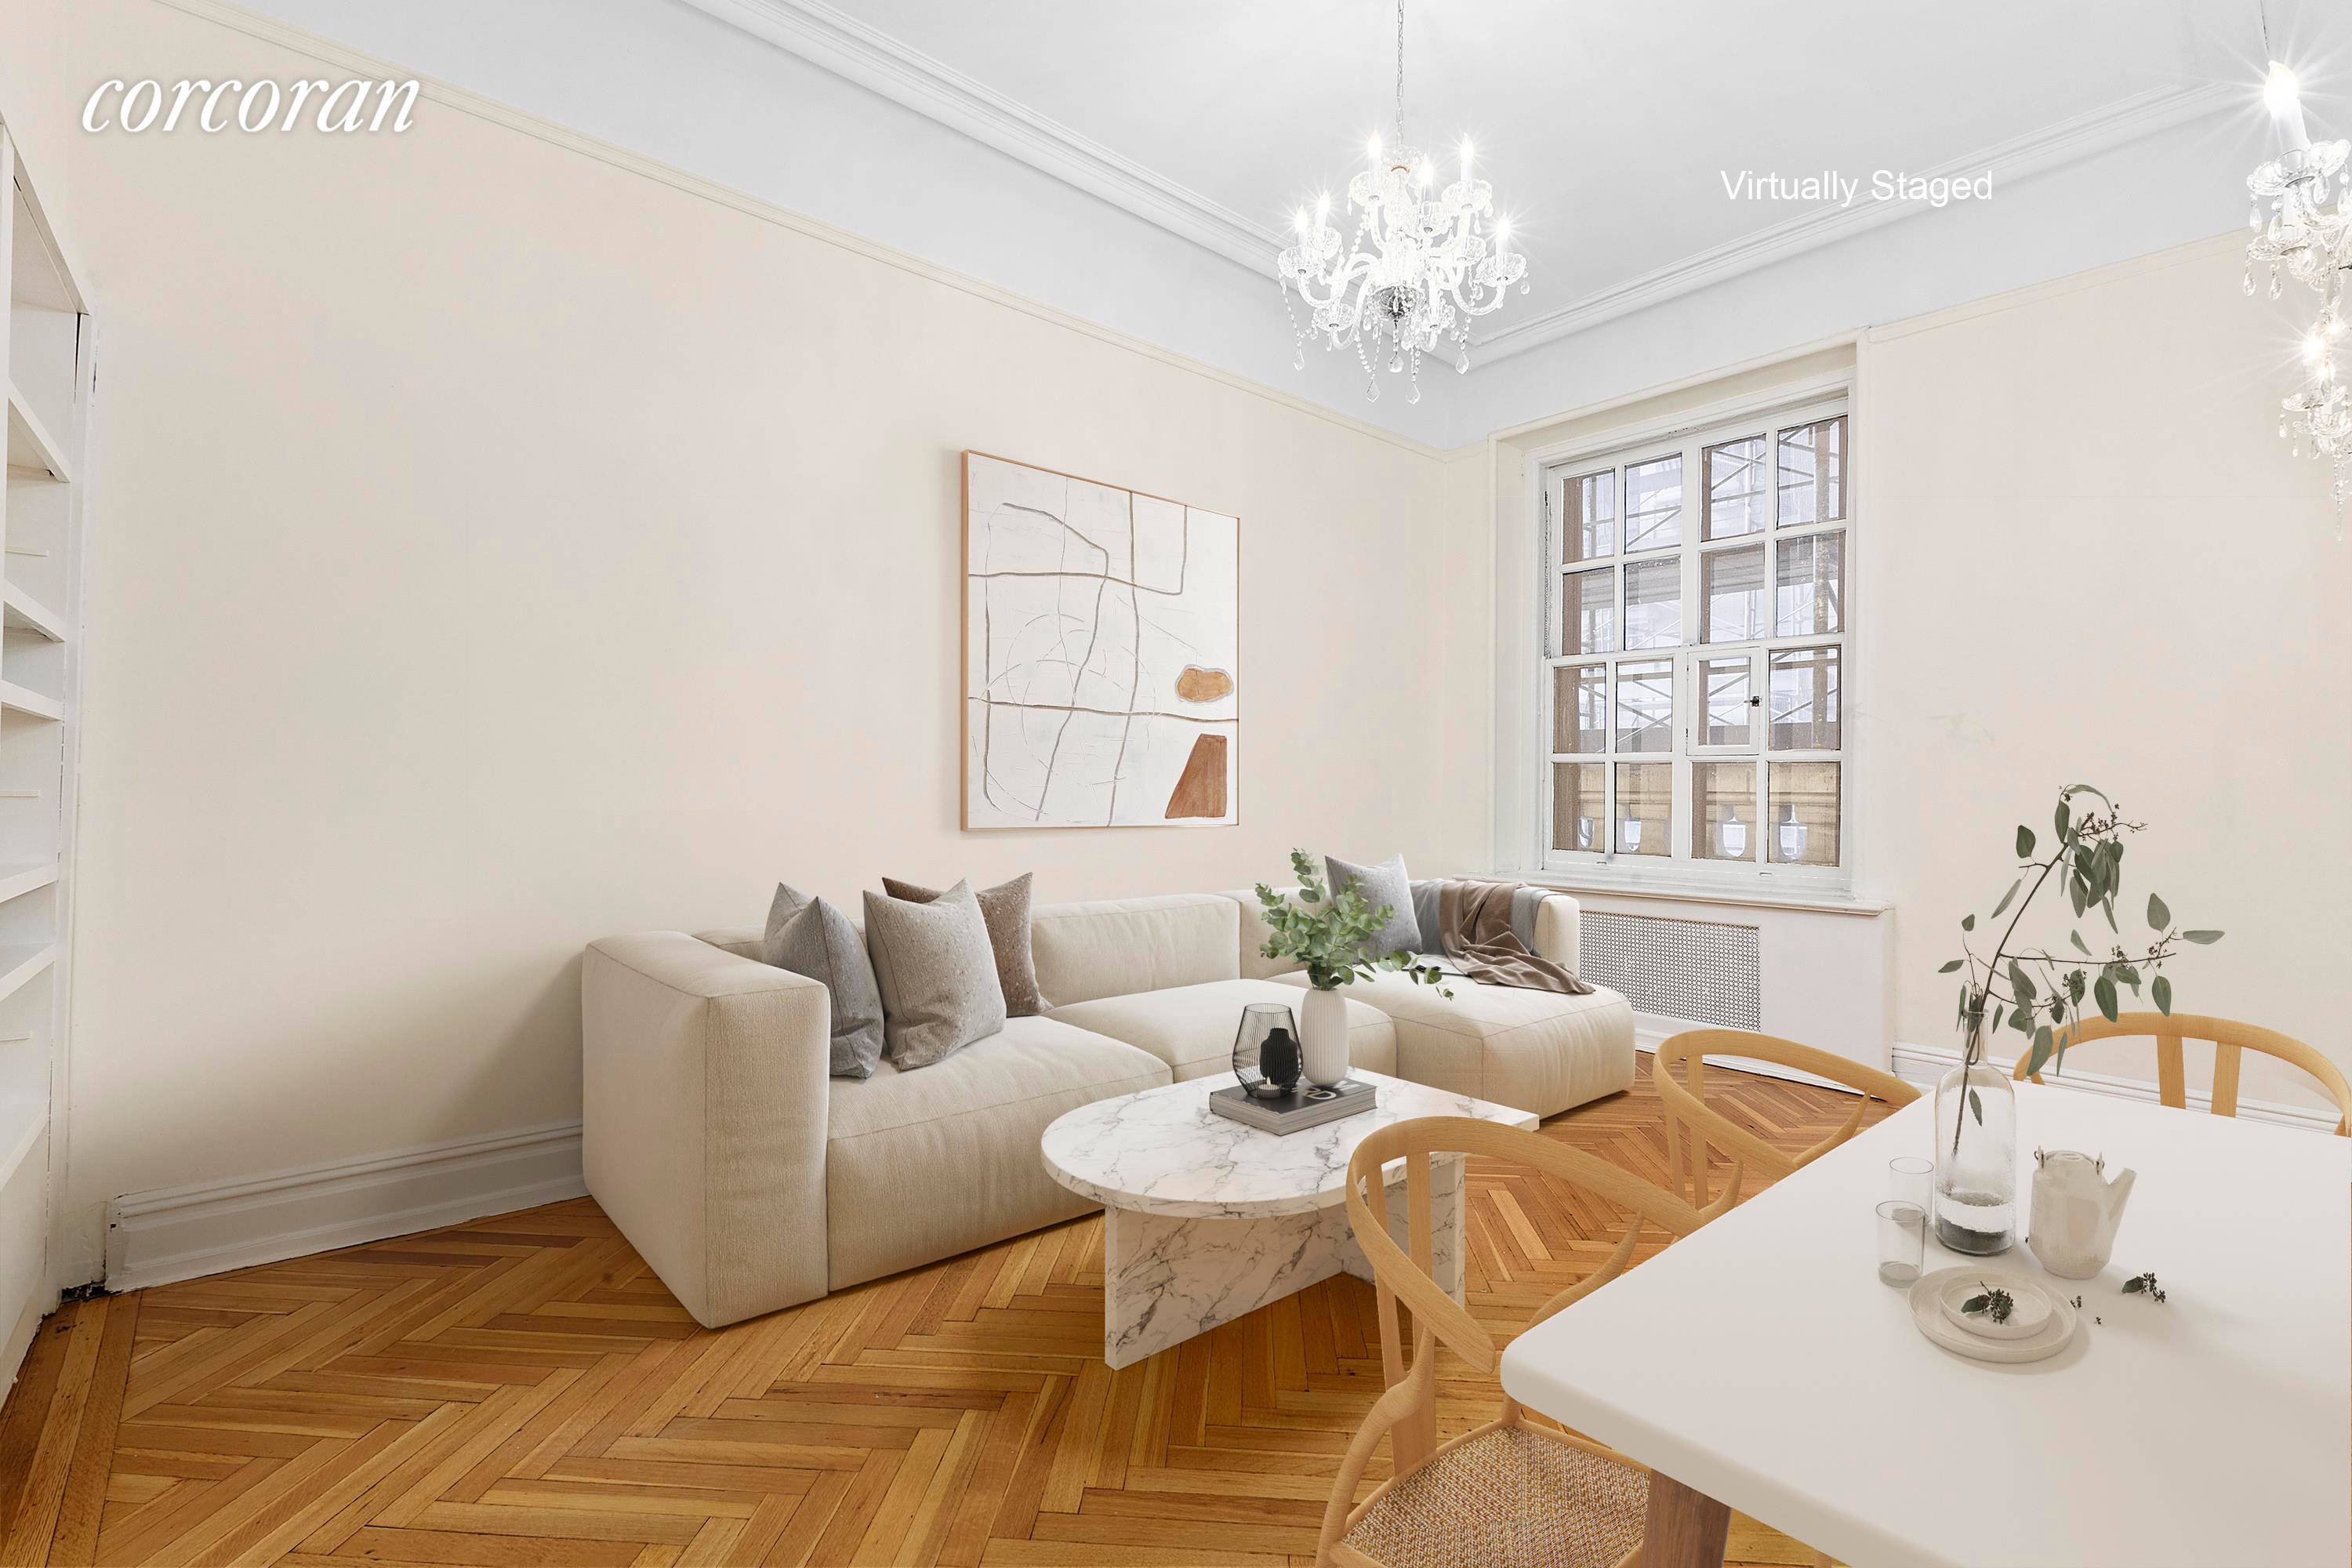 Welcome home to 4 102 at the historic pre war condominium, the Ansonia, conveniently located on the Upper West side between 73rd and 74th Street and Broadway.